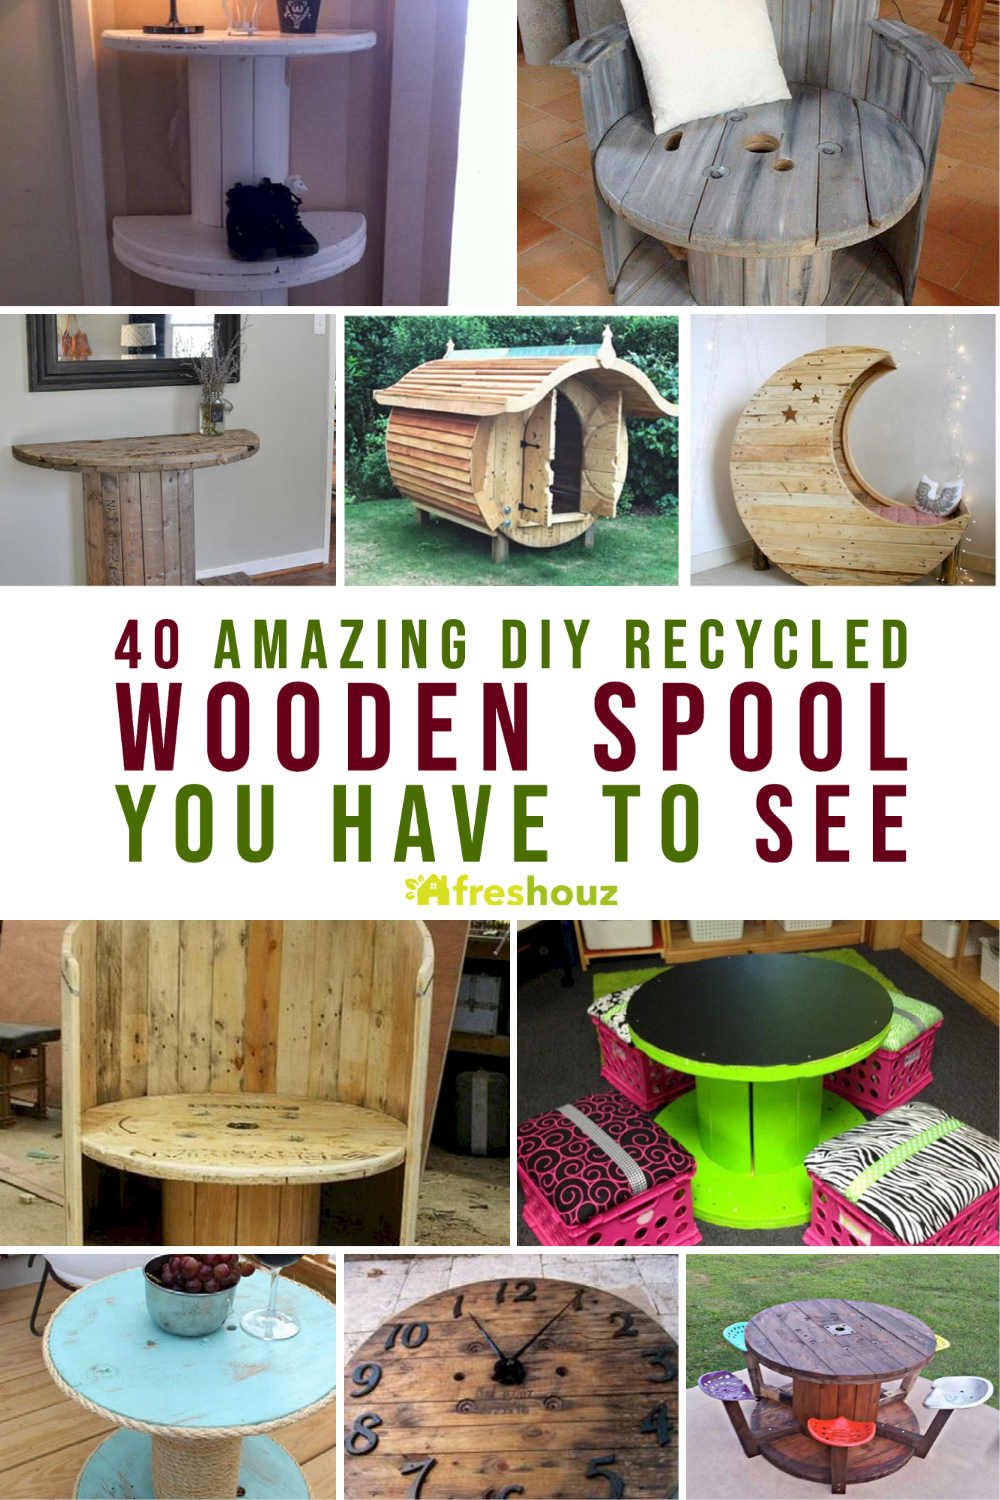 40 Amazing DIY Recycled Wooden Spool You Have To See